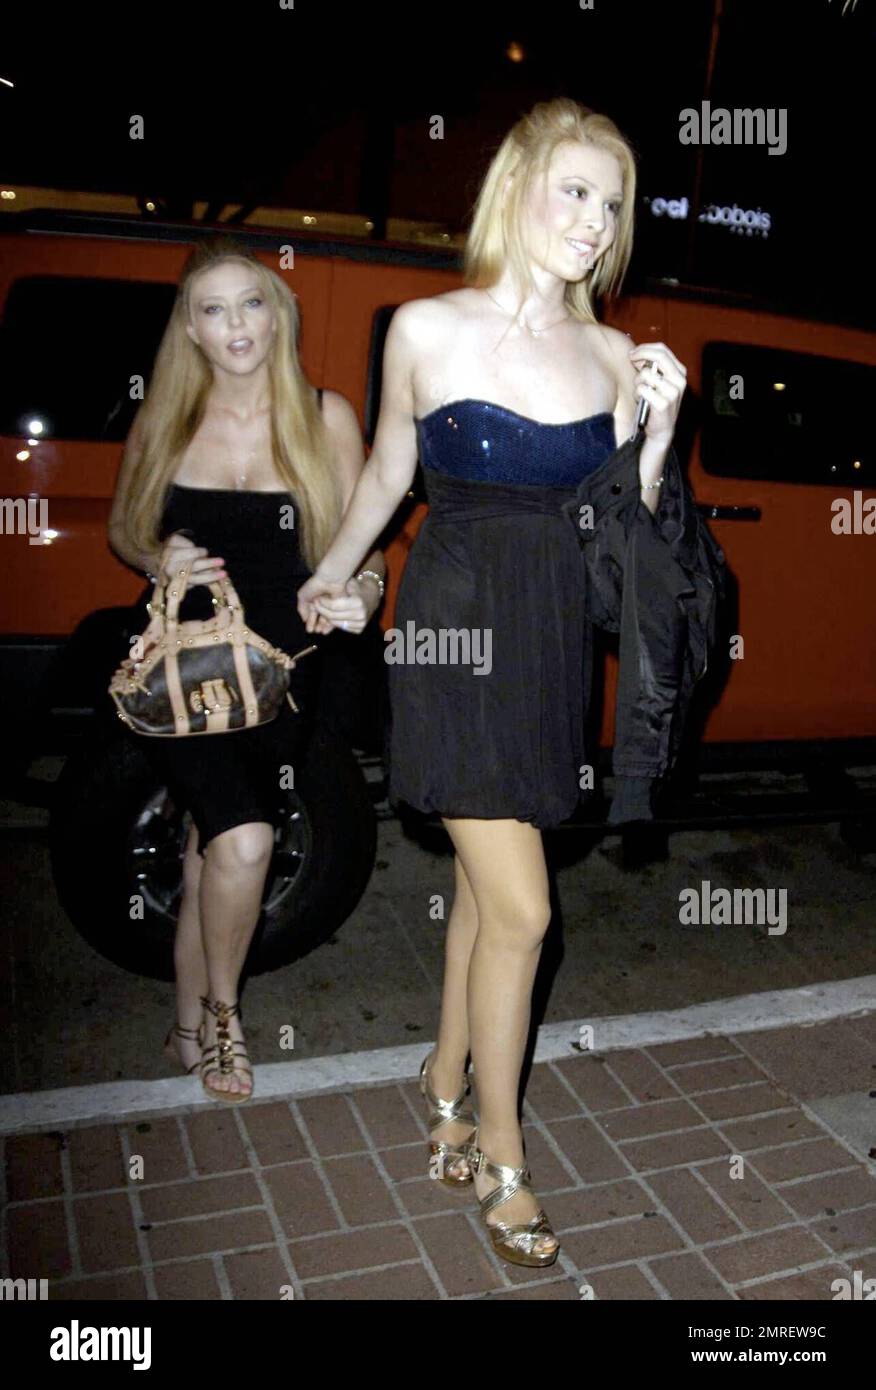 Judy Landers and daughters Kristy and Lindsey arrive at the restaurant Madeos in a big red Hummer. Judy's sister Audrey was also at Madeos for the evening with her son Daniel. Los Angeles, CA. 11/19/08. Stock Photo